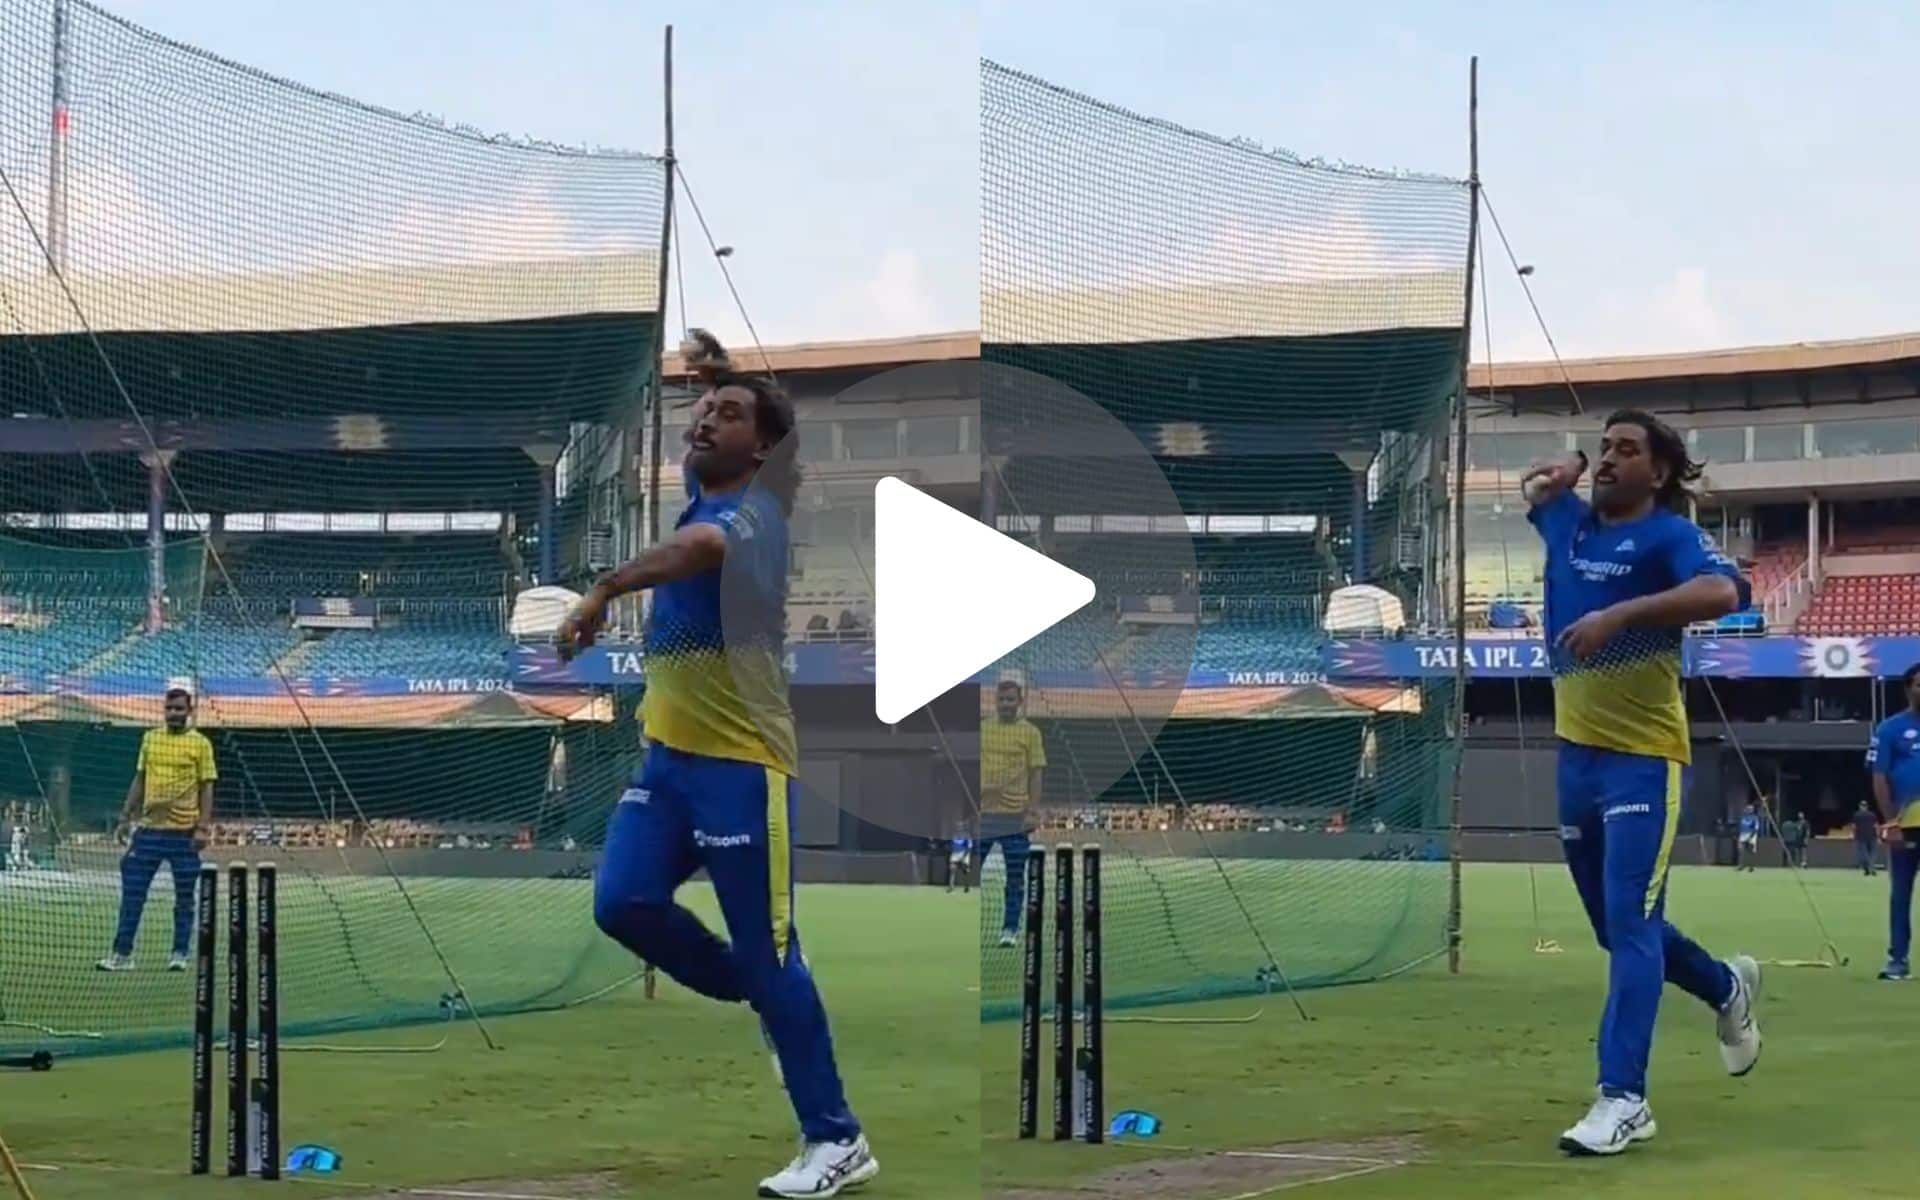 [Watch] MS Dhoni To Bowl In His Farewell RCB vs CSK Game? Video Ignites Excitement Among Fans